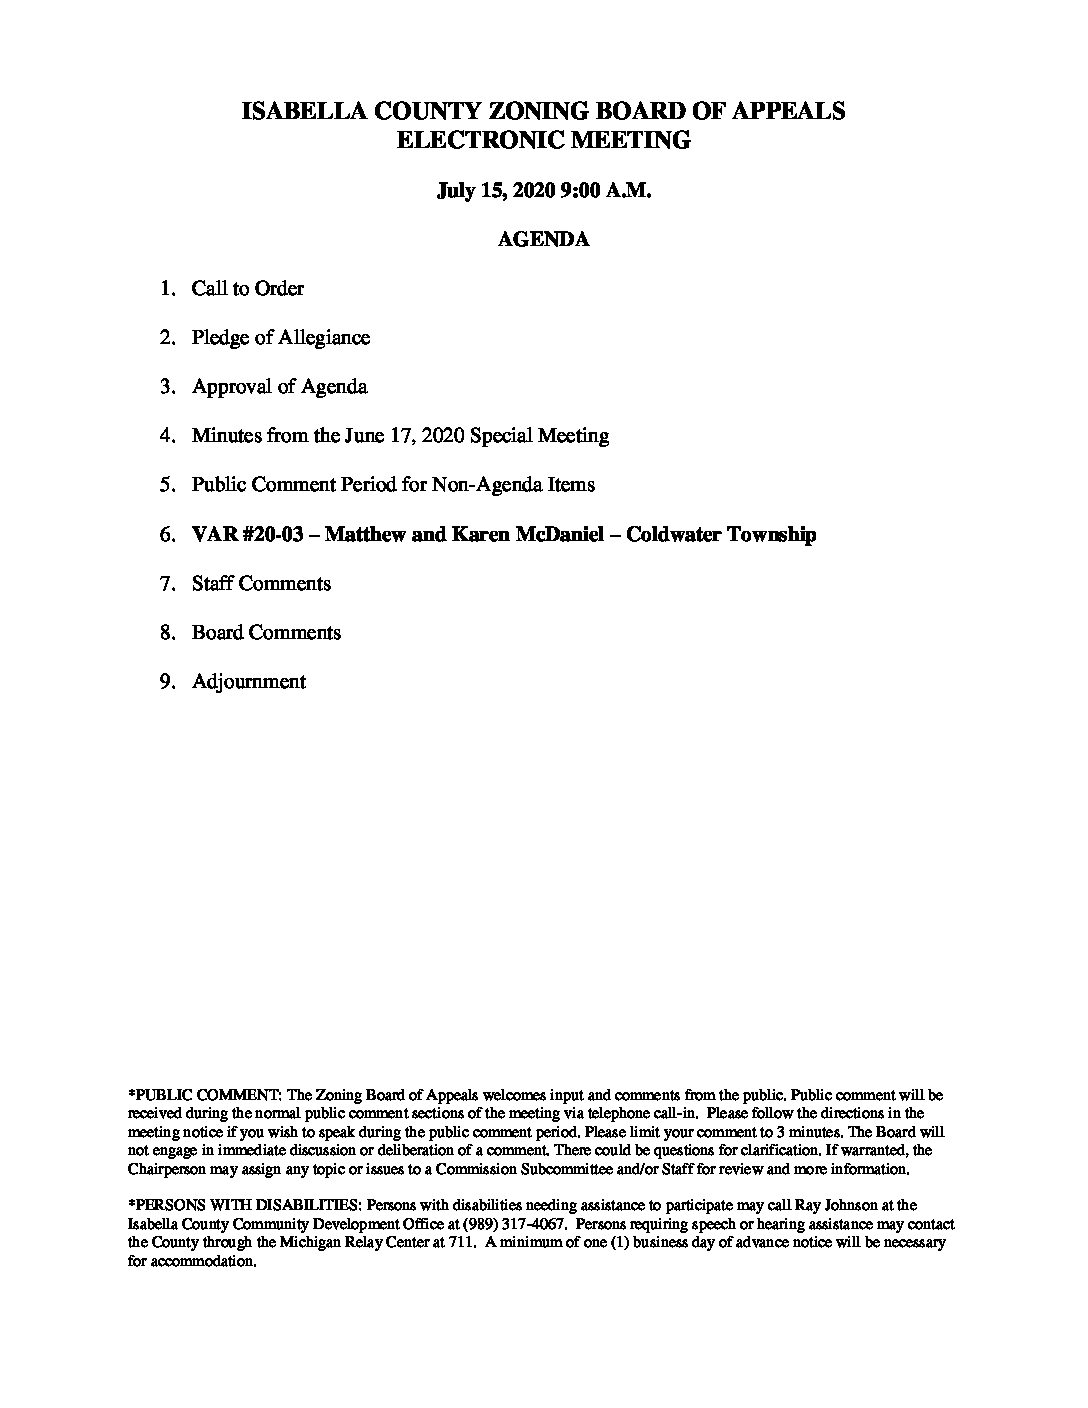 preview image of first page July 15, 2020 Agenda